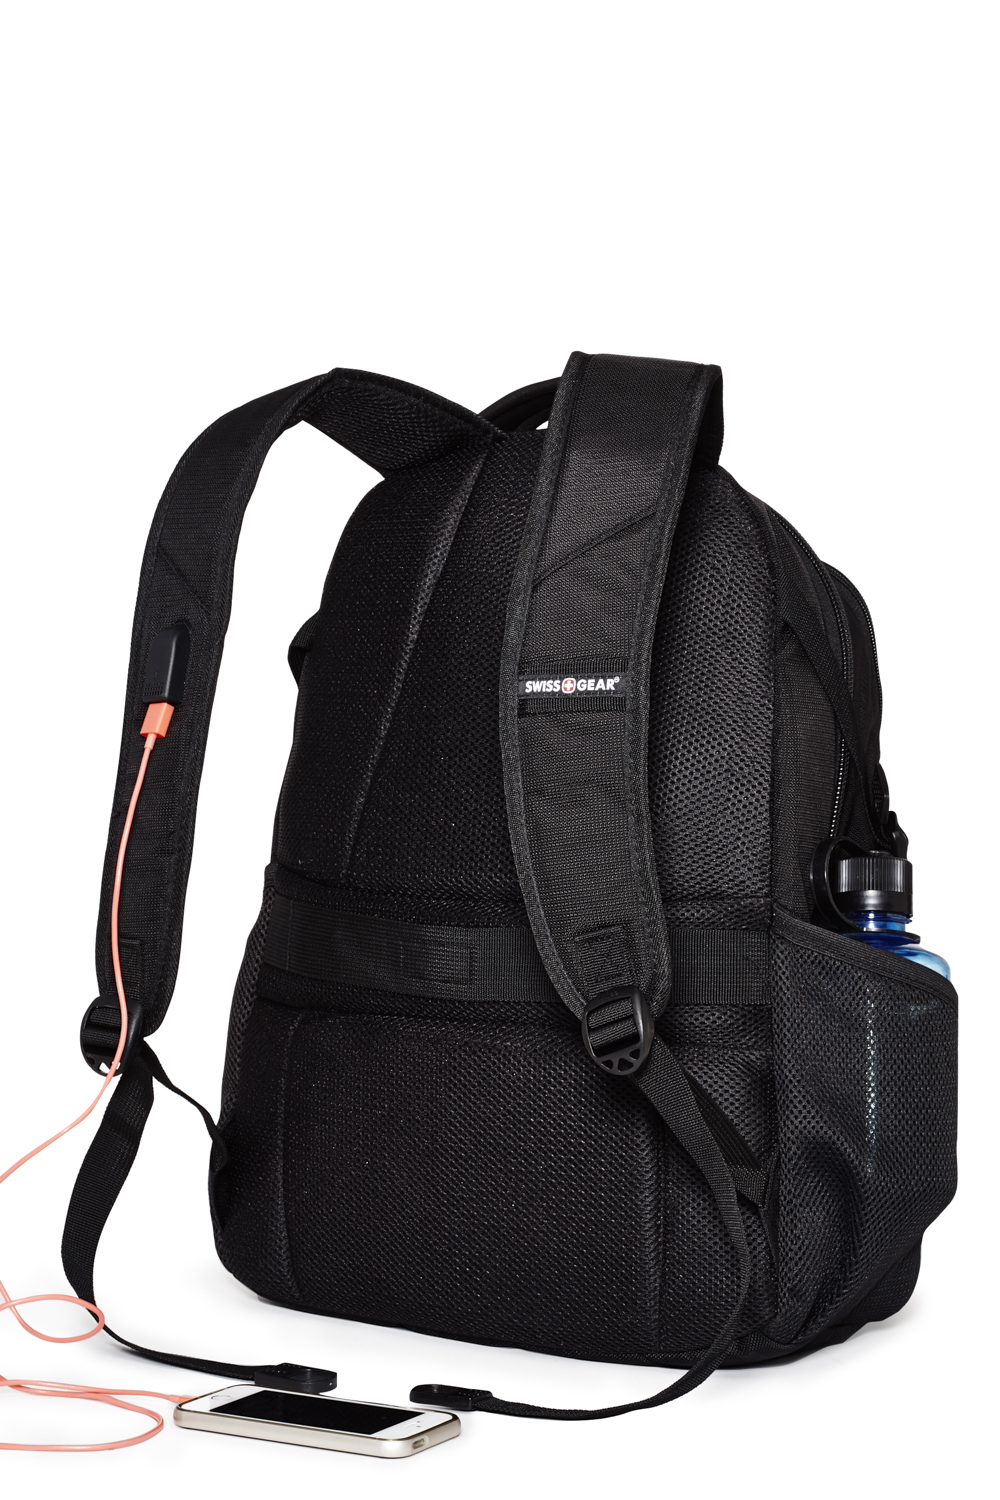 Swissgear 2536 15-inch Computer Backpack with USB Port - Black